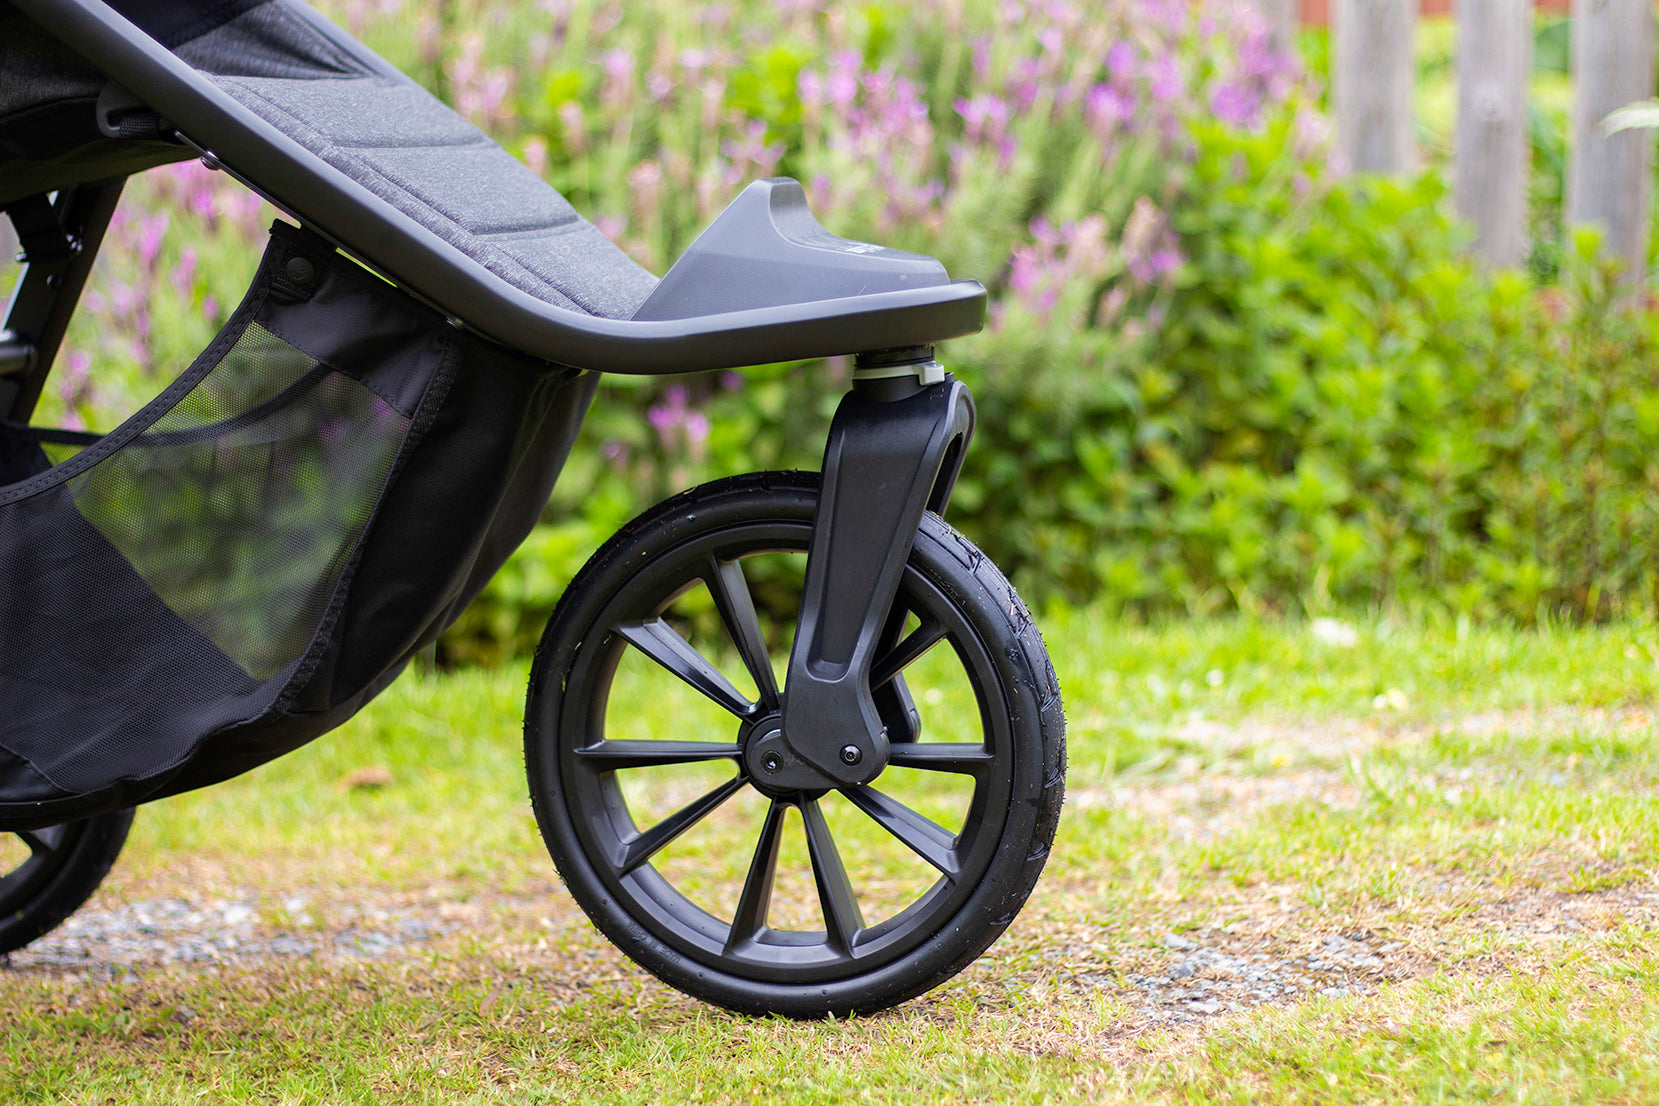 Make sure your stroller's wheels and brakes are in good working order 